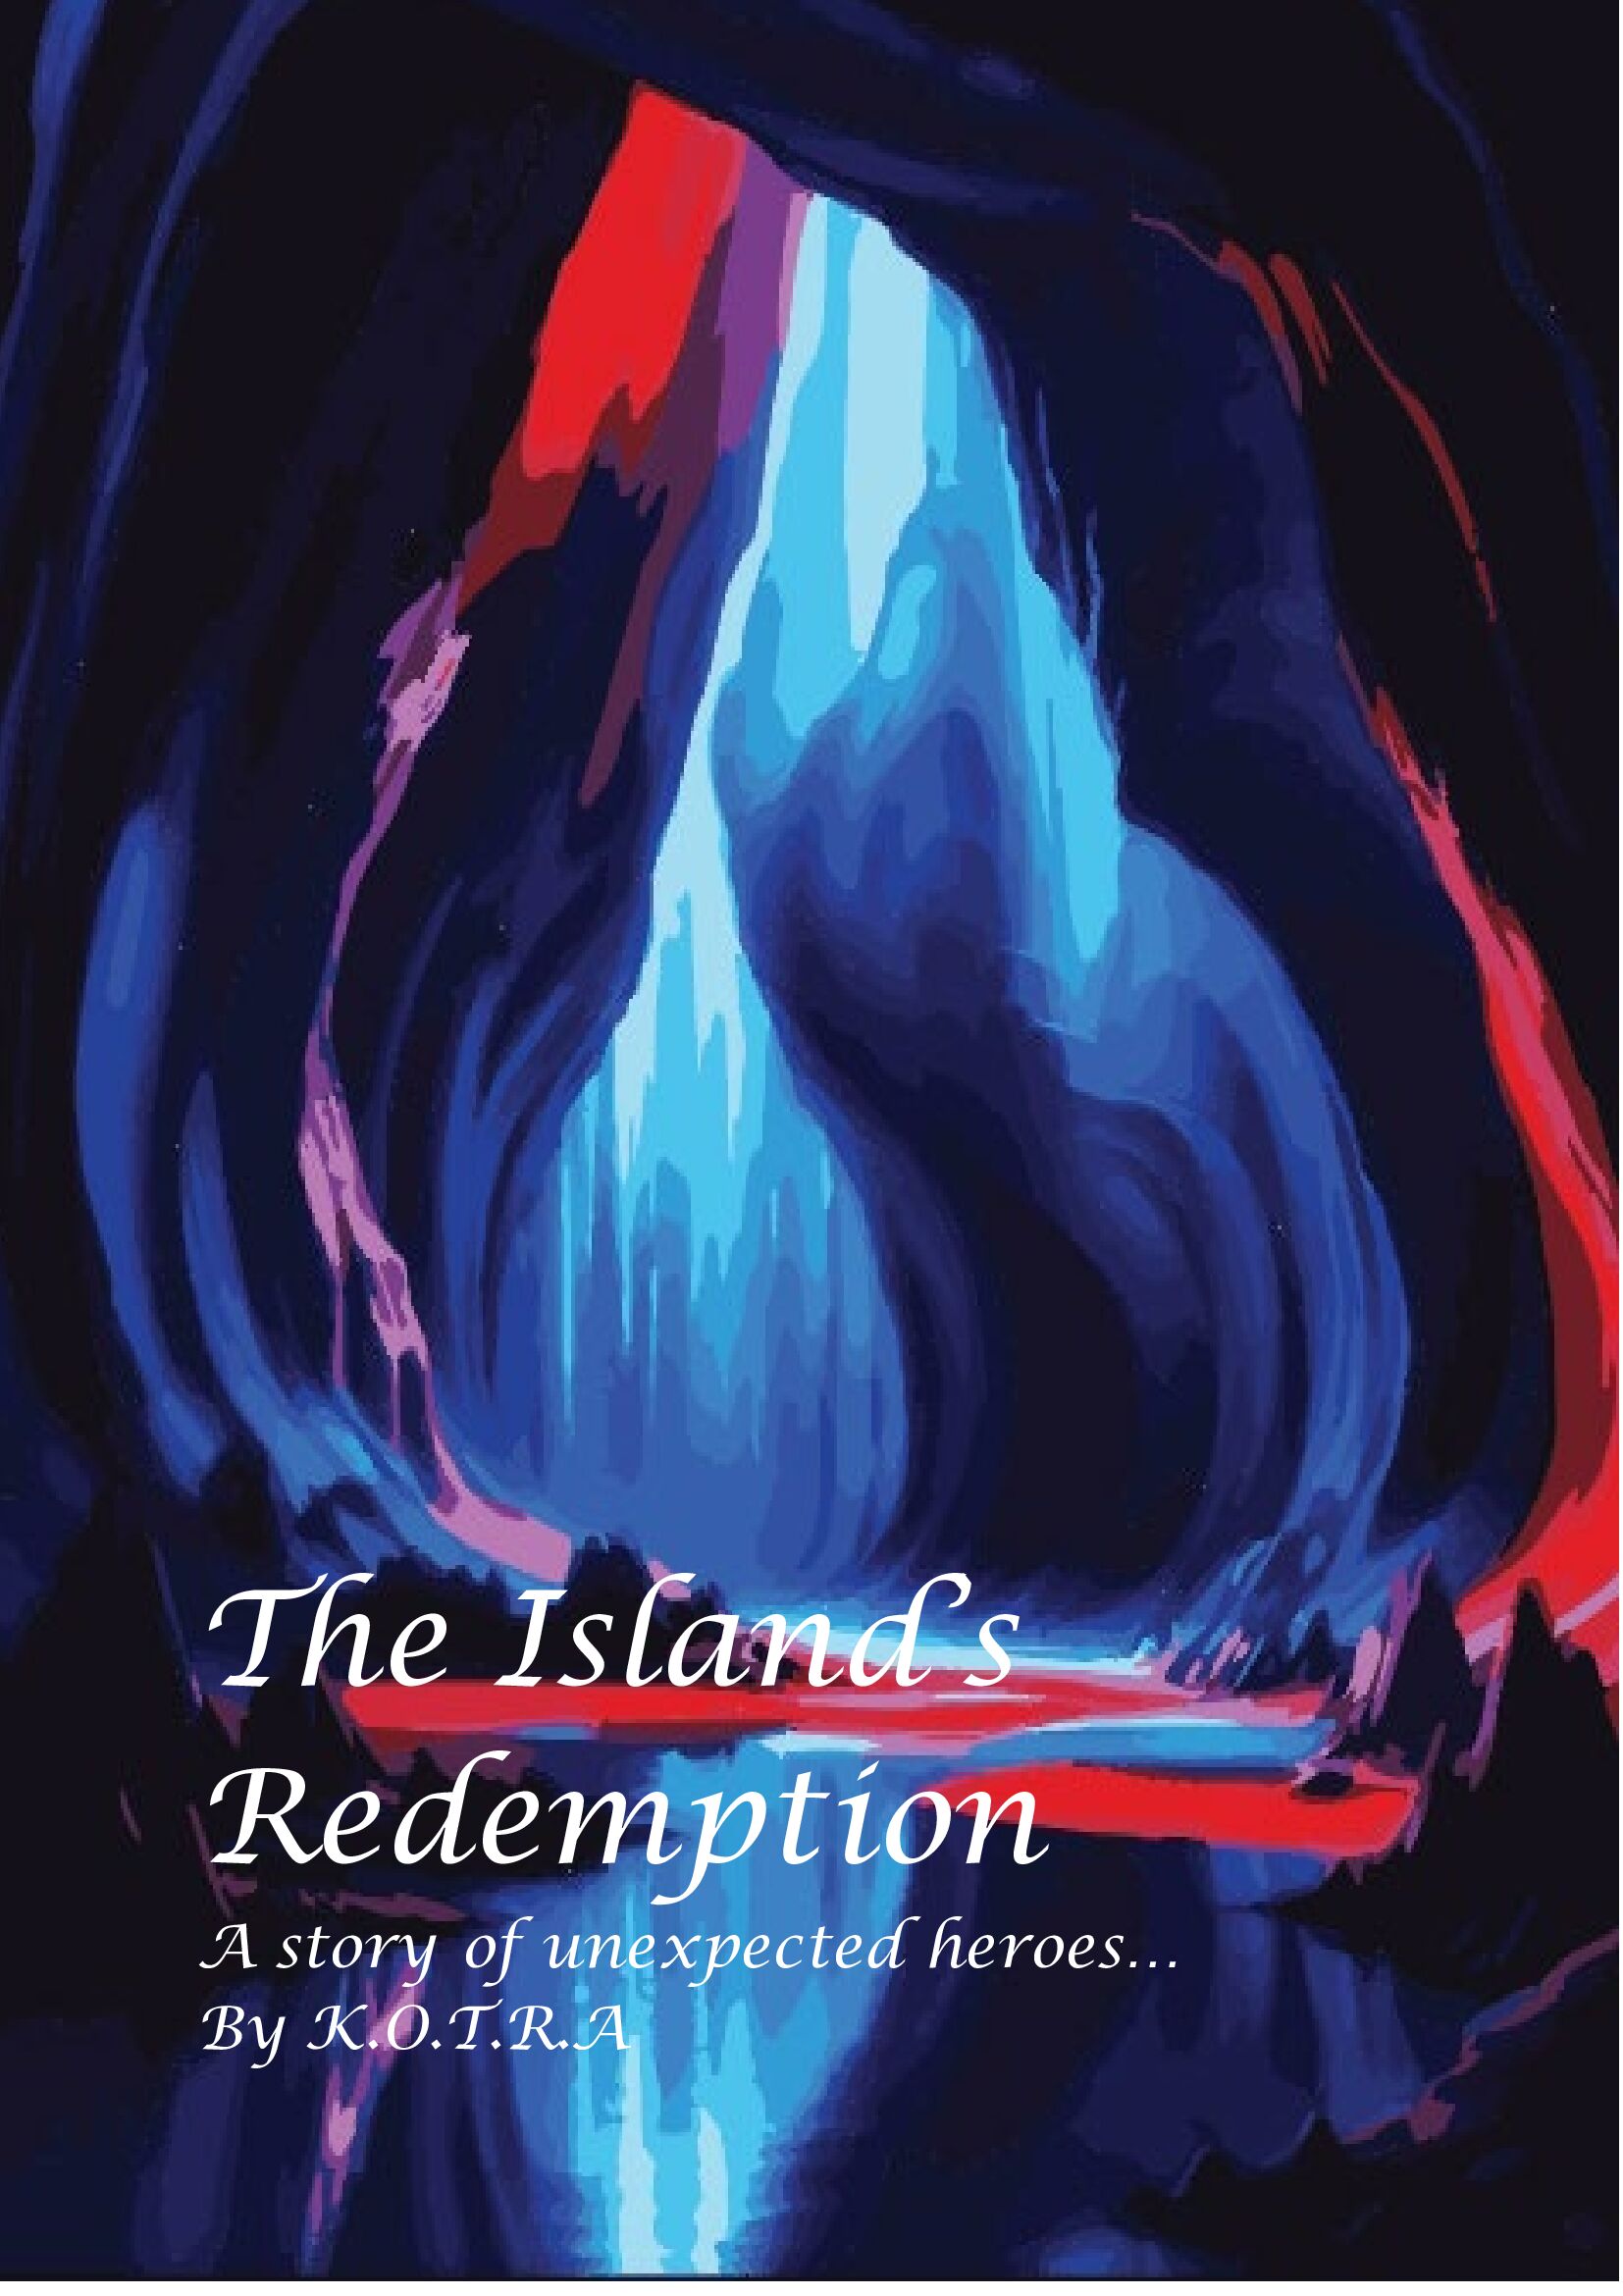 The Island's Redemption